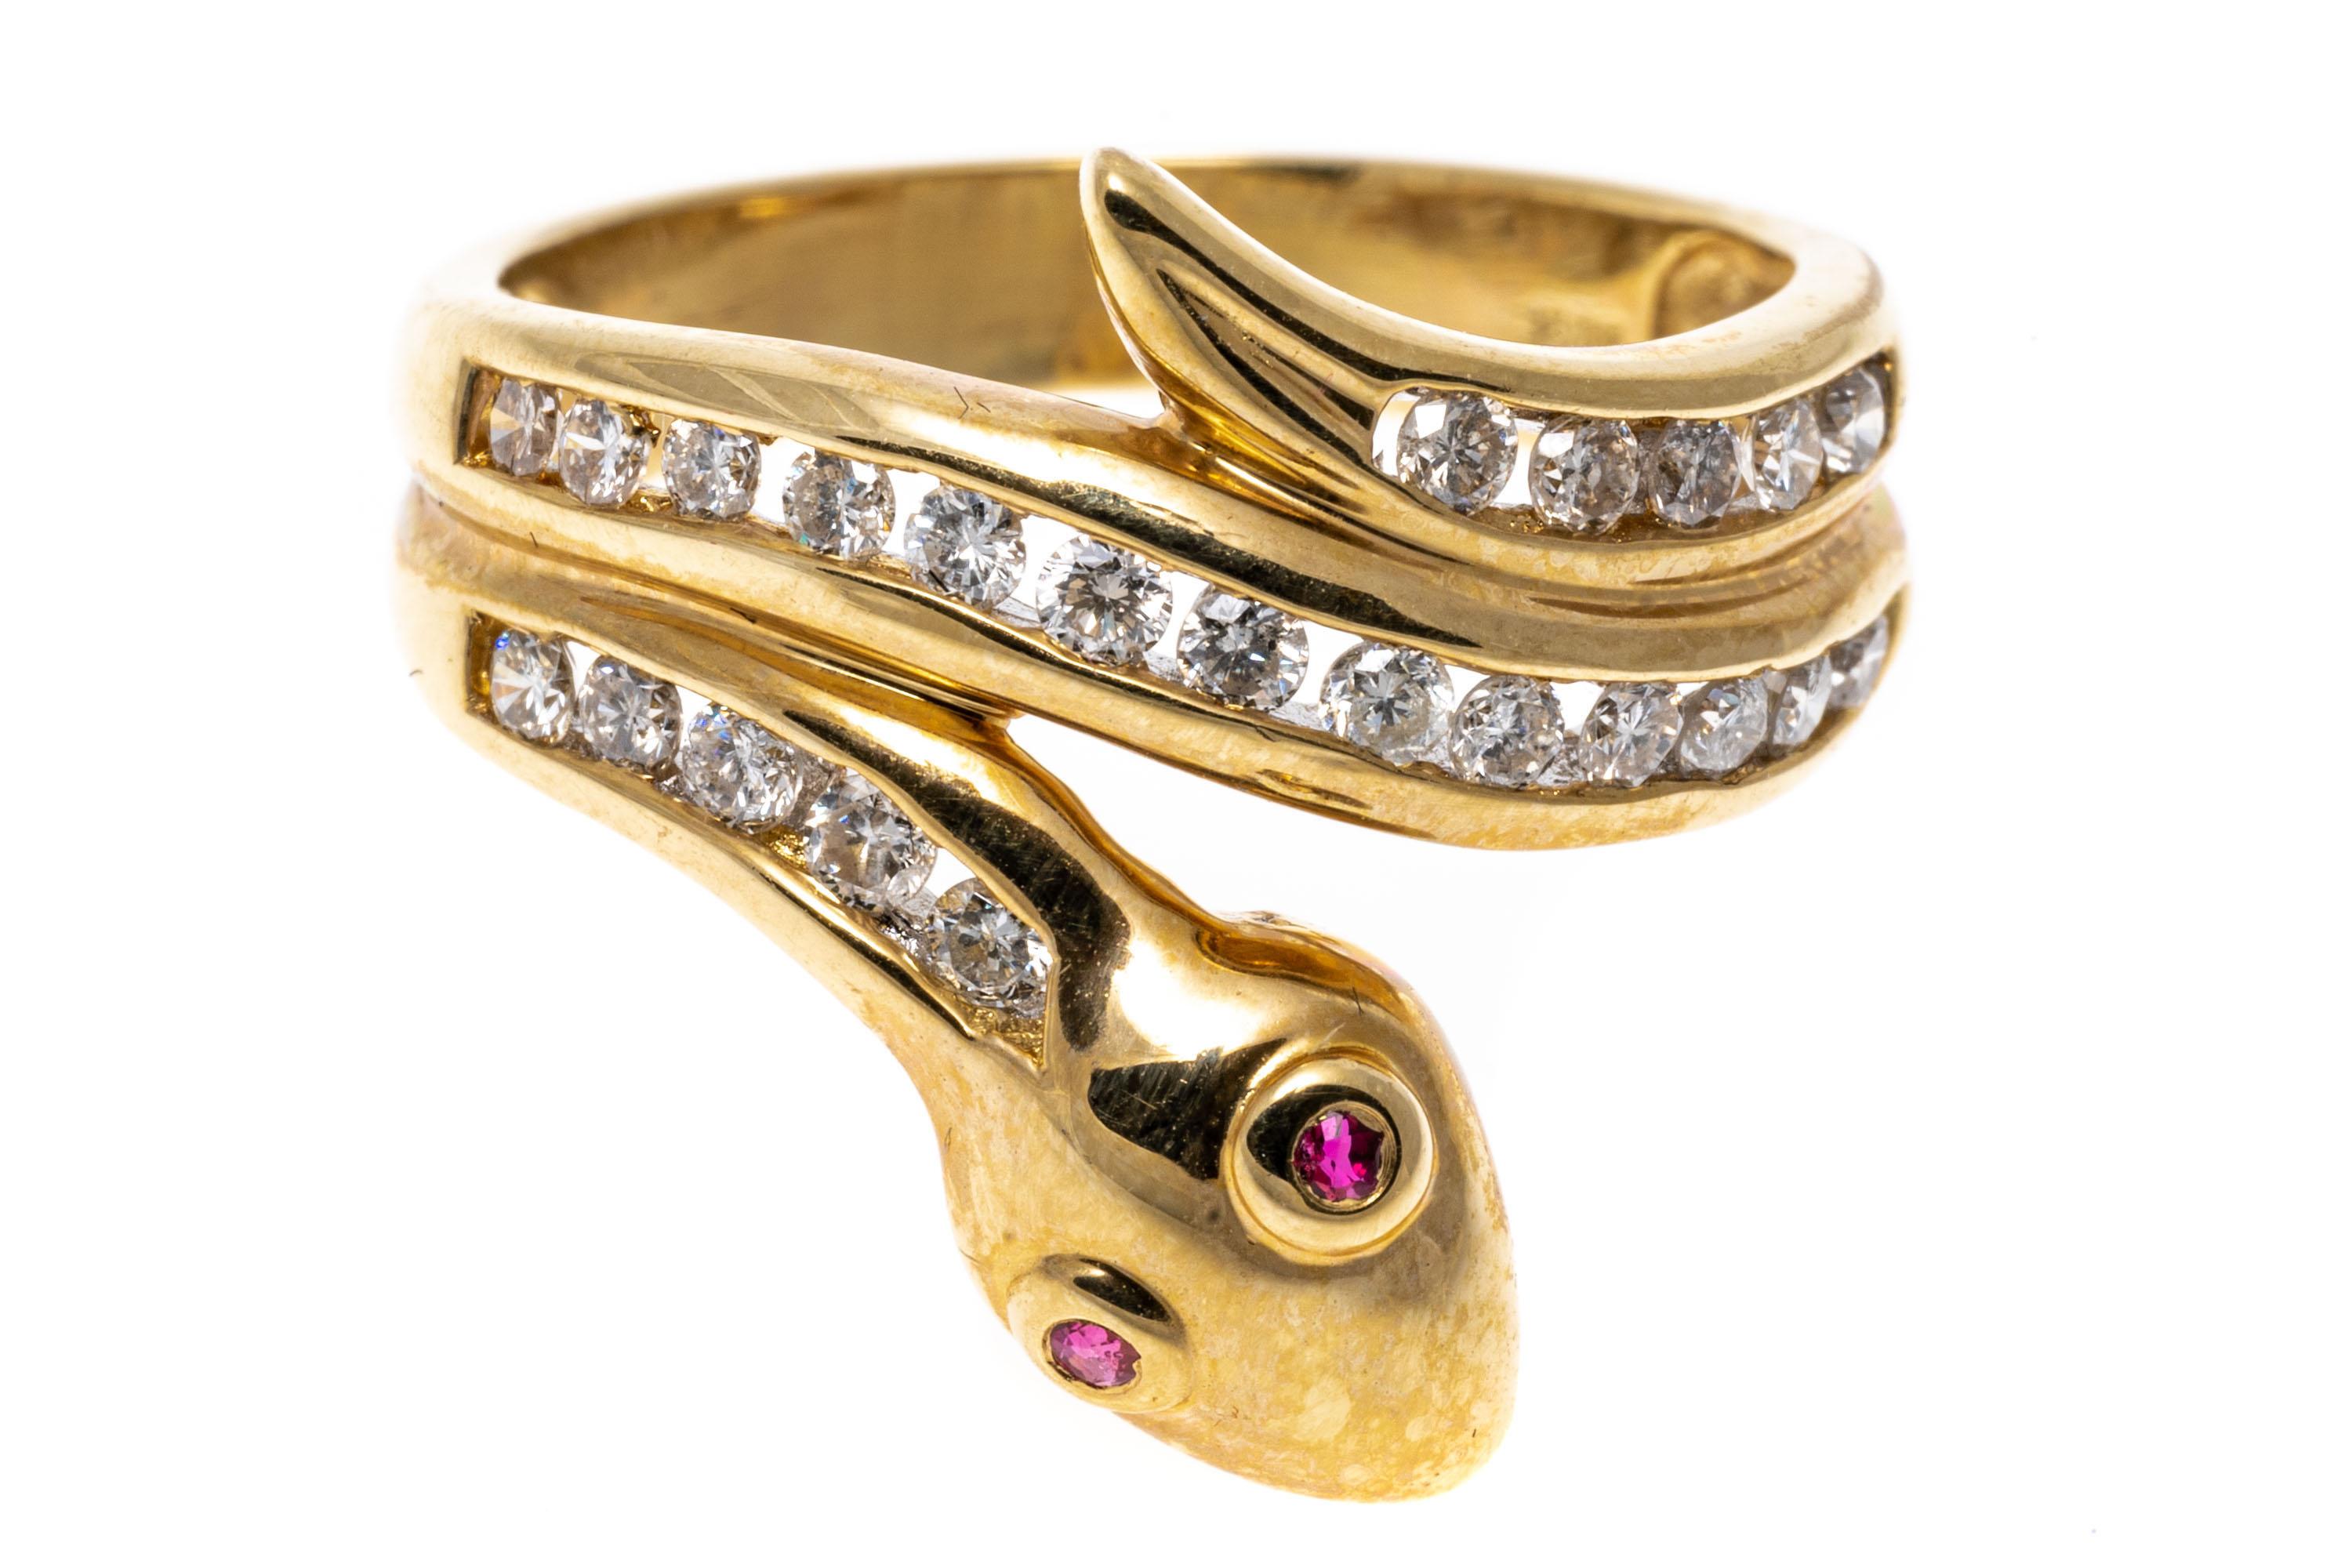 This charming ring is a coiled snake motif, with two red faceted, bezel set ruby eyes, approximately 0.02 TCW, and decorated with a channel set, round brilliant cut diamond body, approximately 0.40 TCW.
Marks: 14k
Dimensions: 3/4